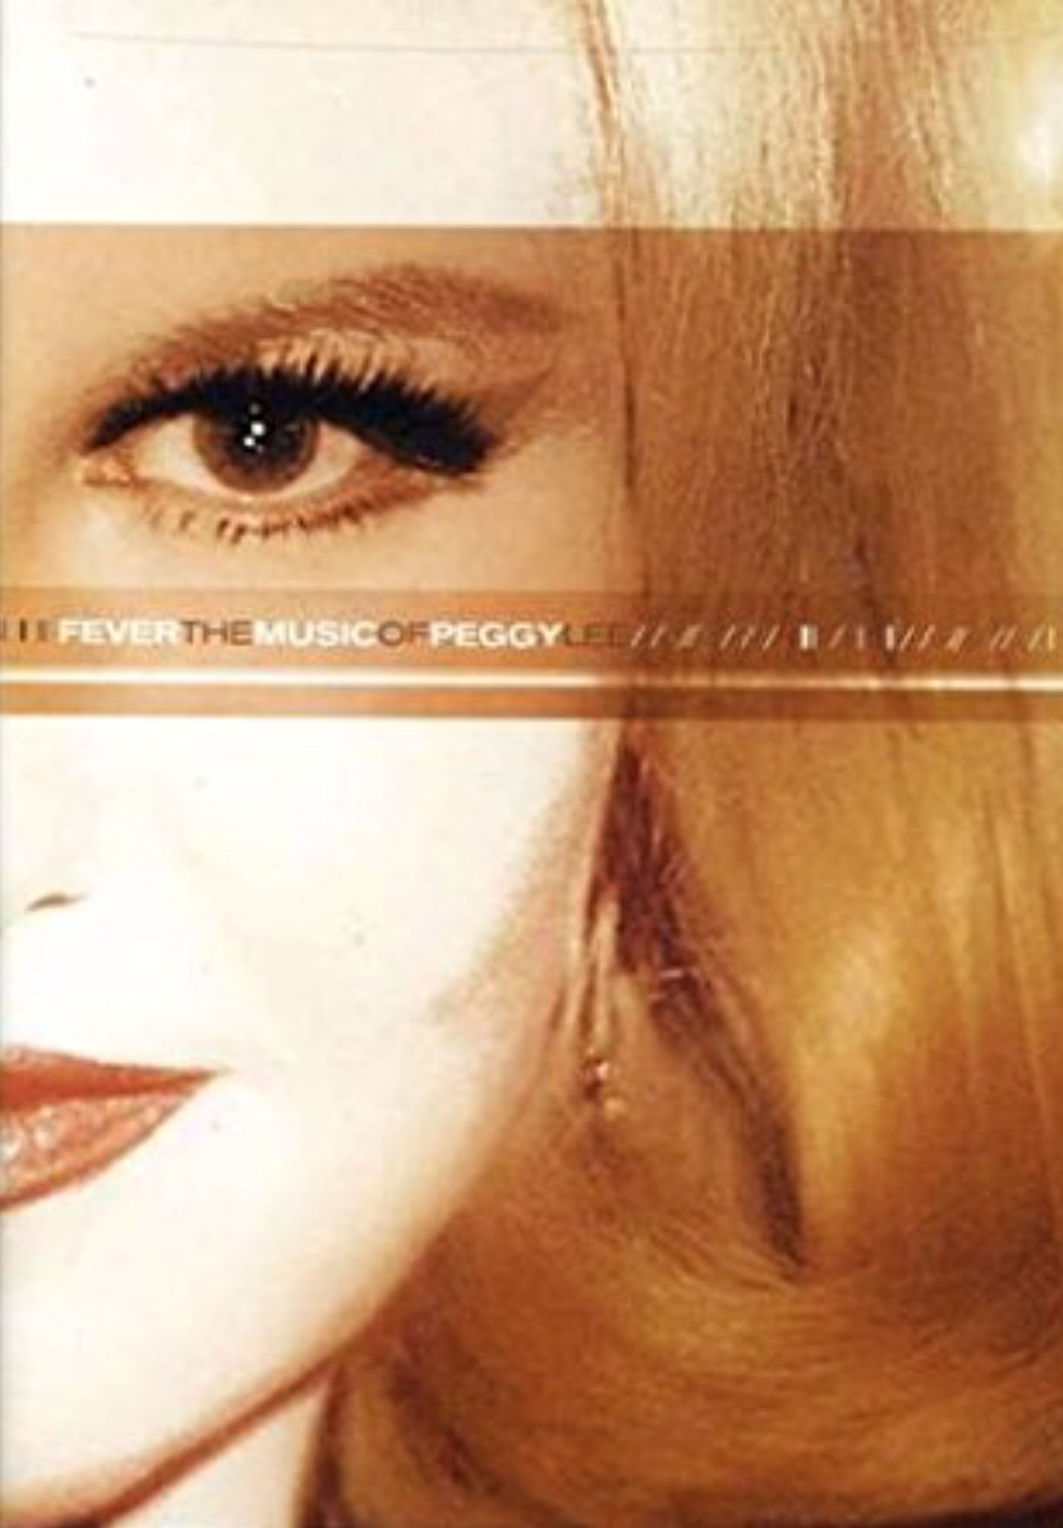 Fever: The Music of Peggy Lee (2004) Screenshot 1 